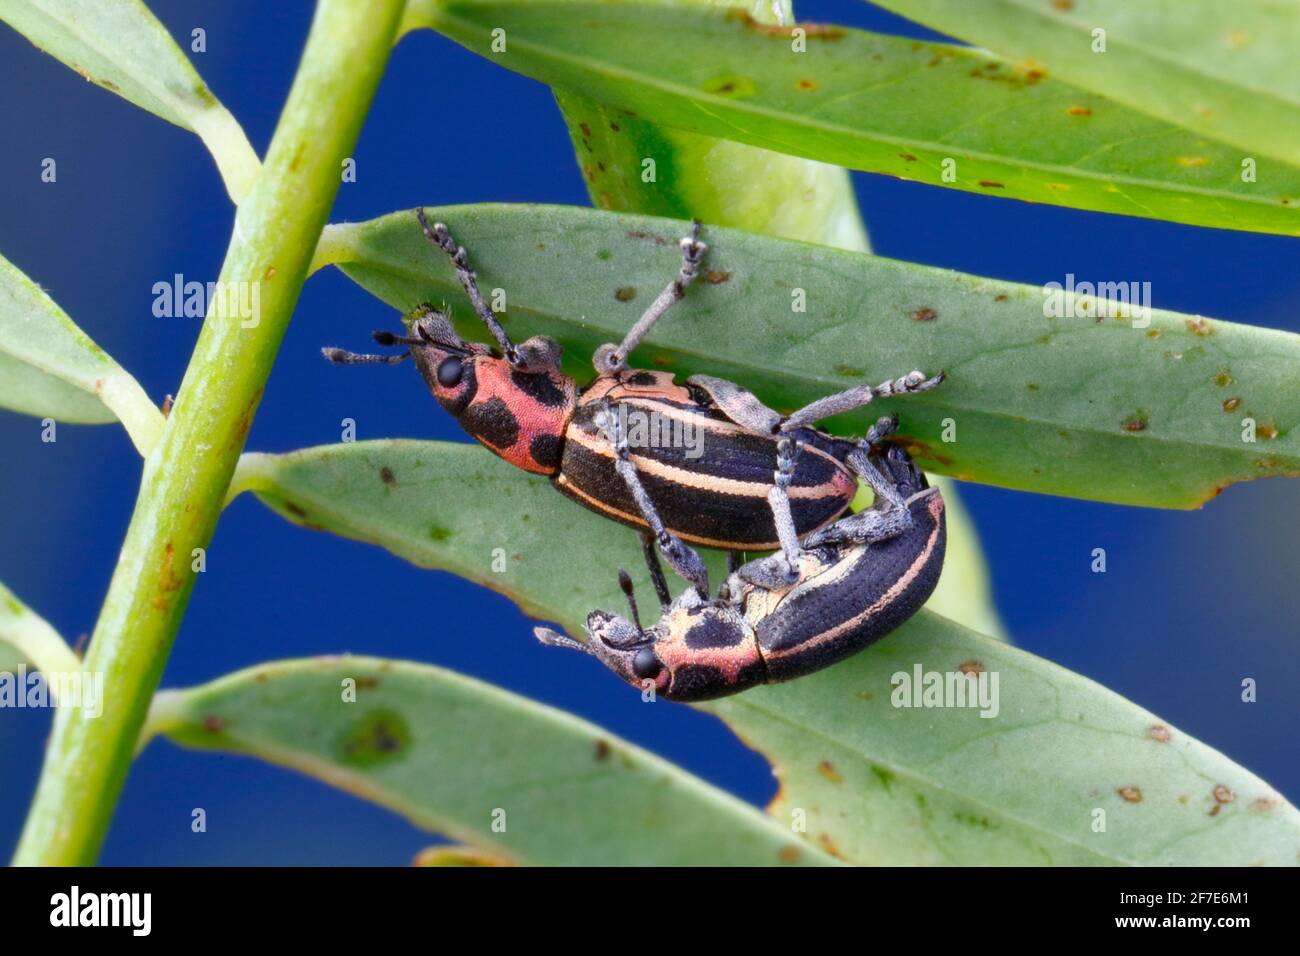 broad nosed weevils, Eudiagogus maryae, are mating on a legume plant. Stock Photo